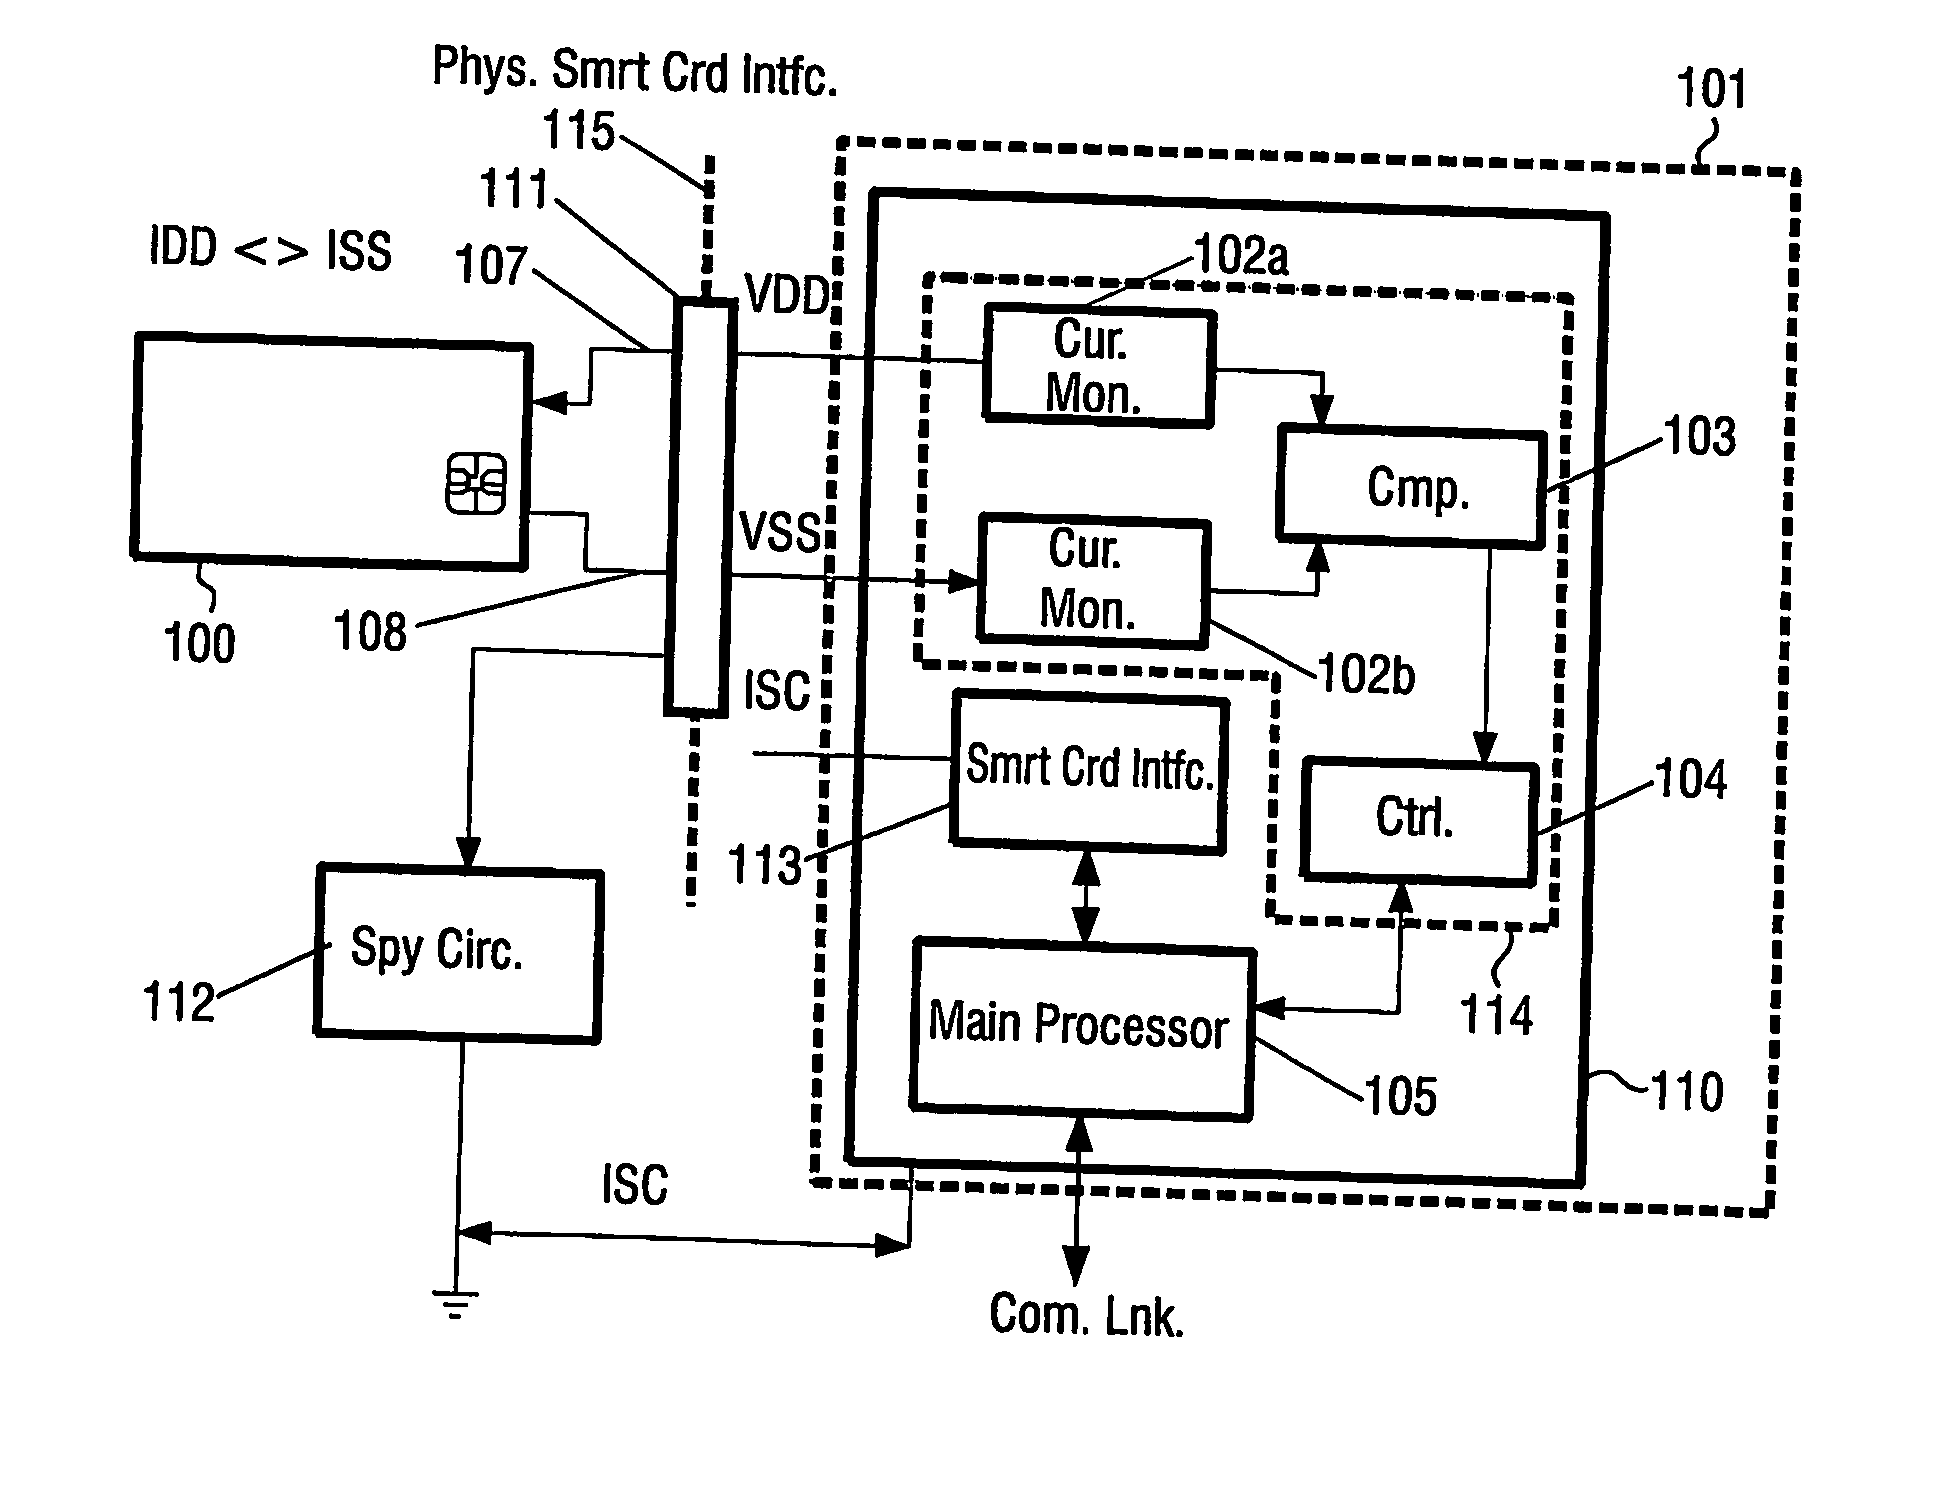 Detection of tampering of a smart card interface